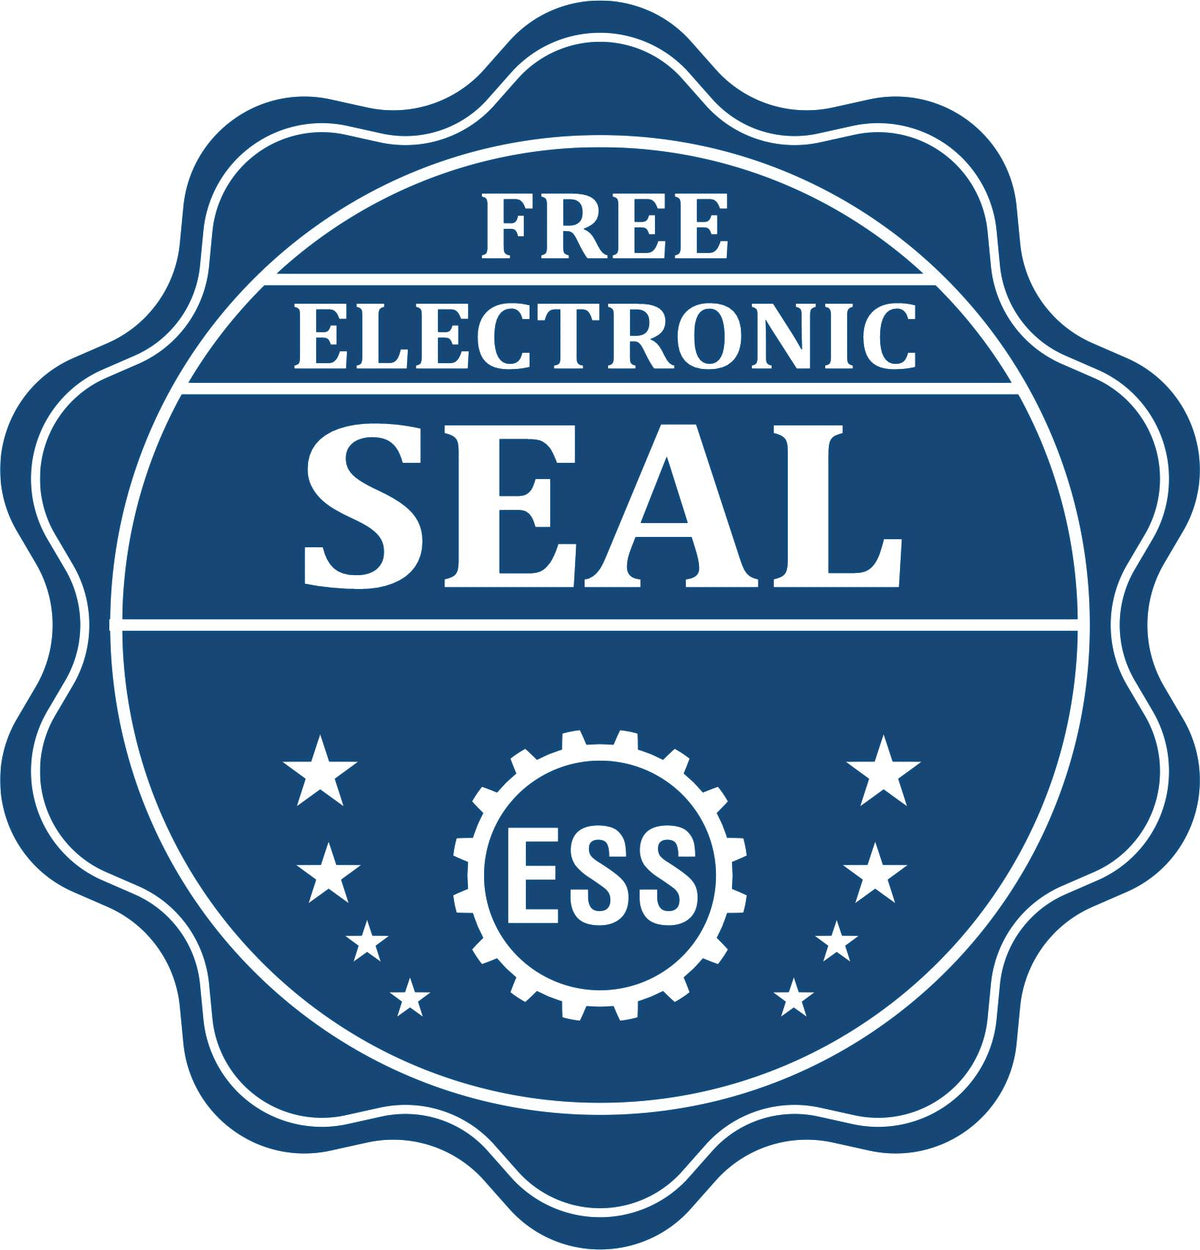 A badge showing a free electronic seal for the Hybrid South Dakota Architect Seal with stars and the ESS gear on the emblem.